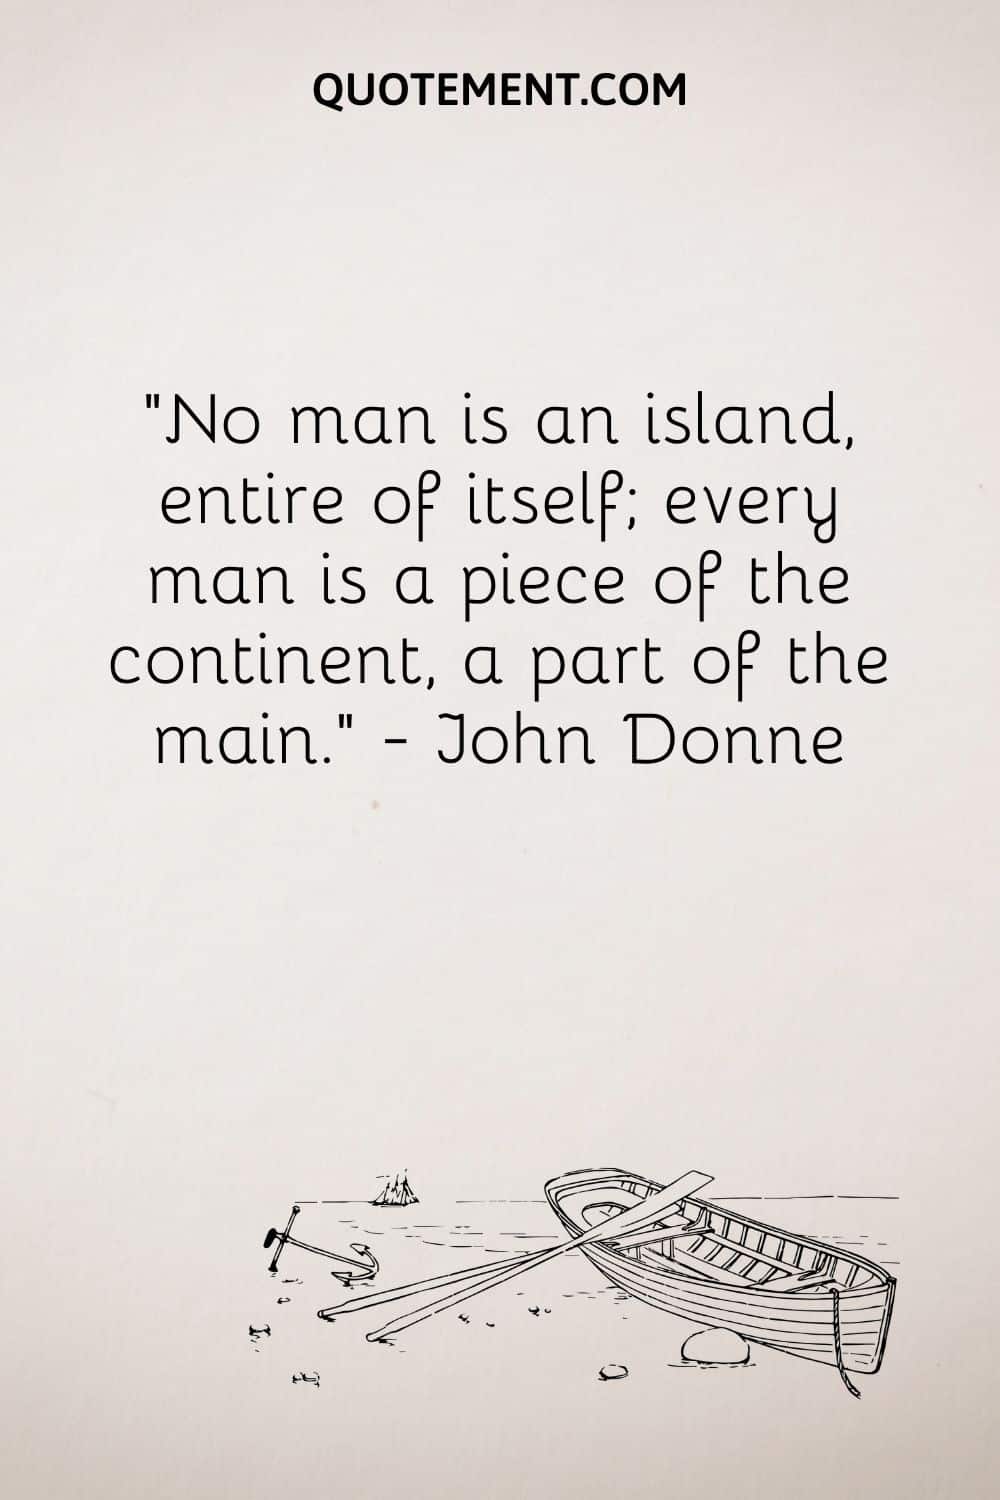 boat on island illustration representing best island quote